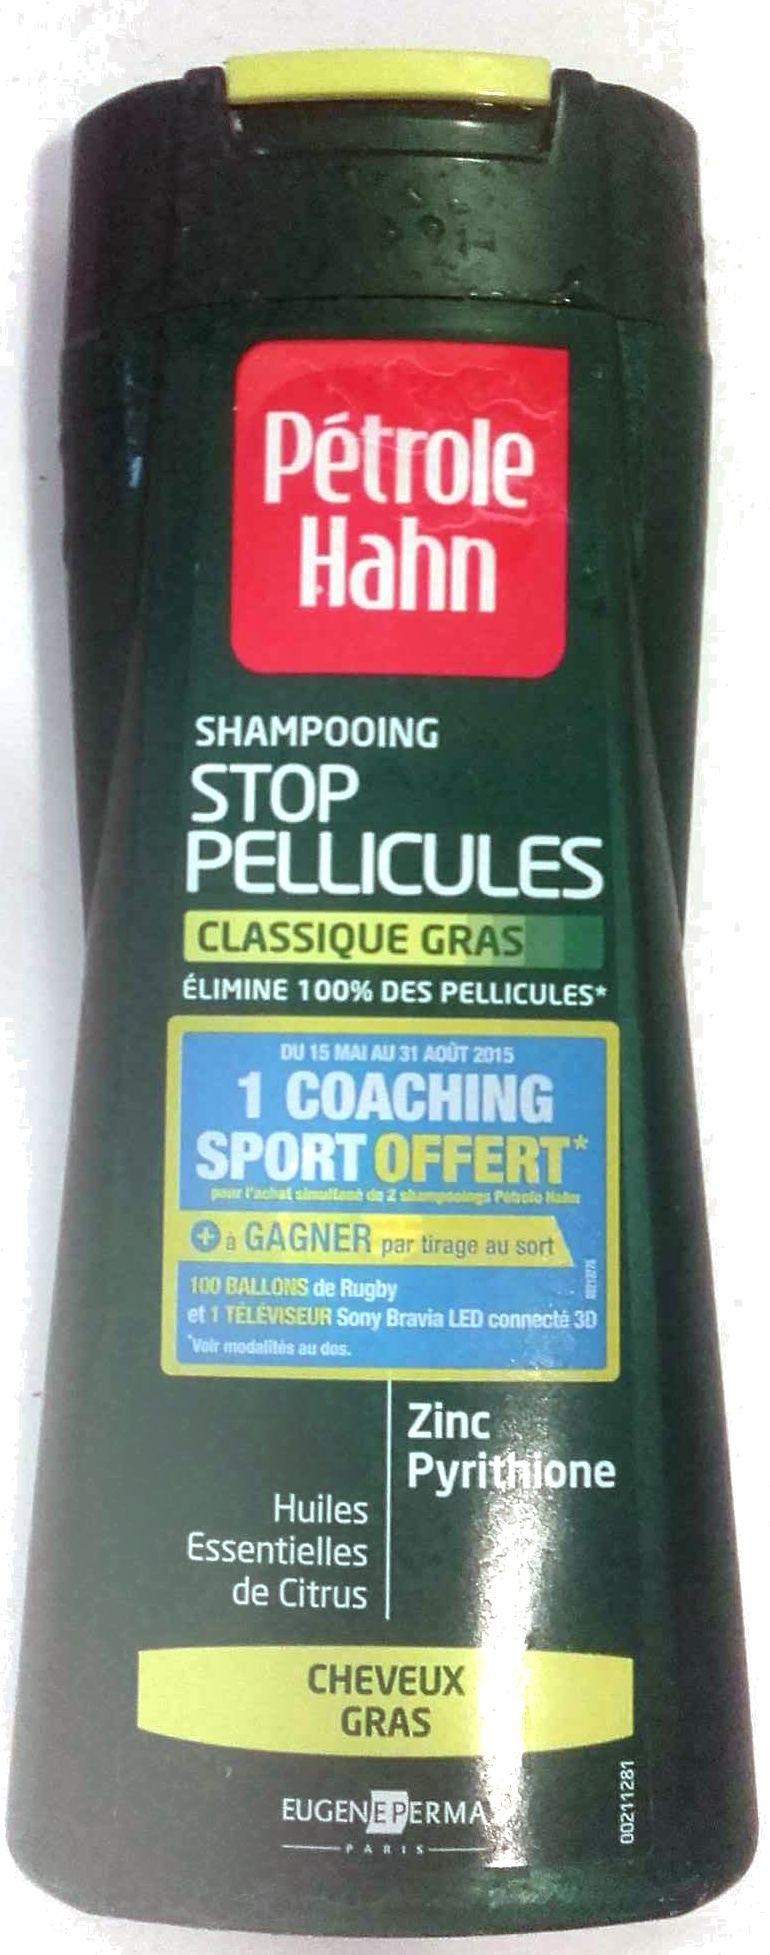 Shampooing Stop Pellicules Classique Gras - Tuote - fr